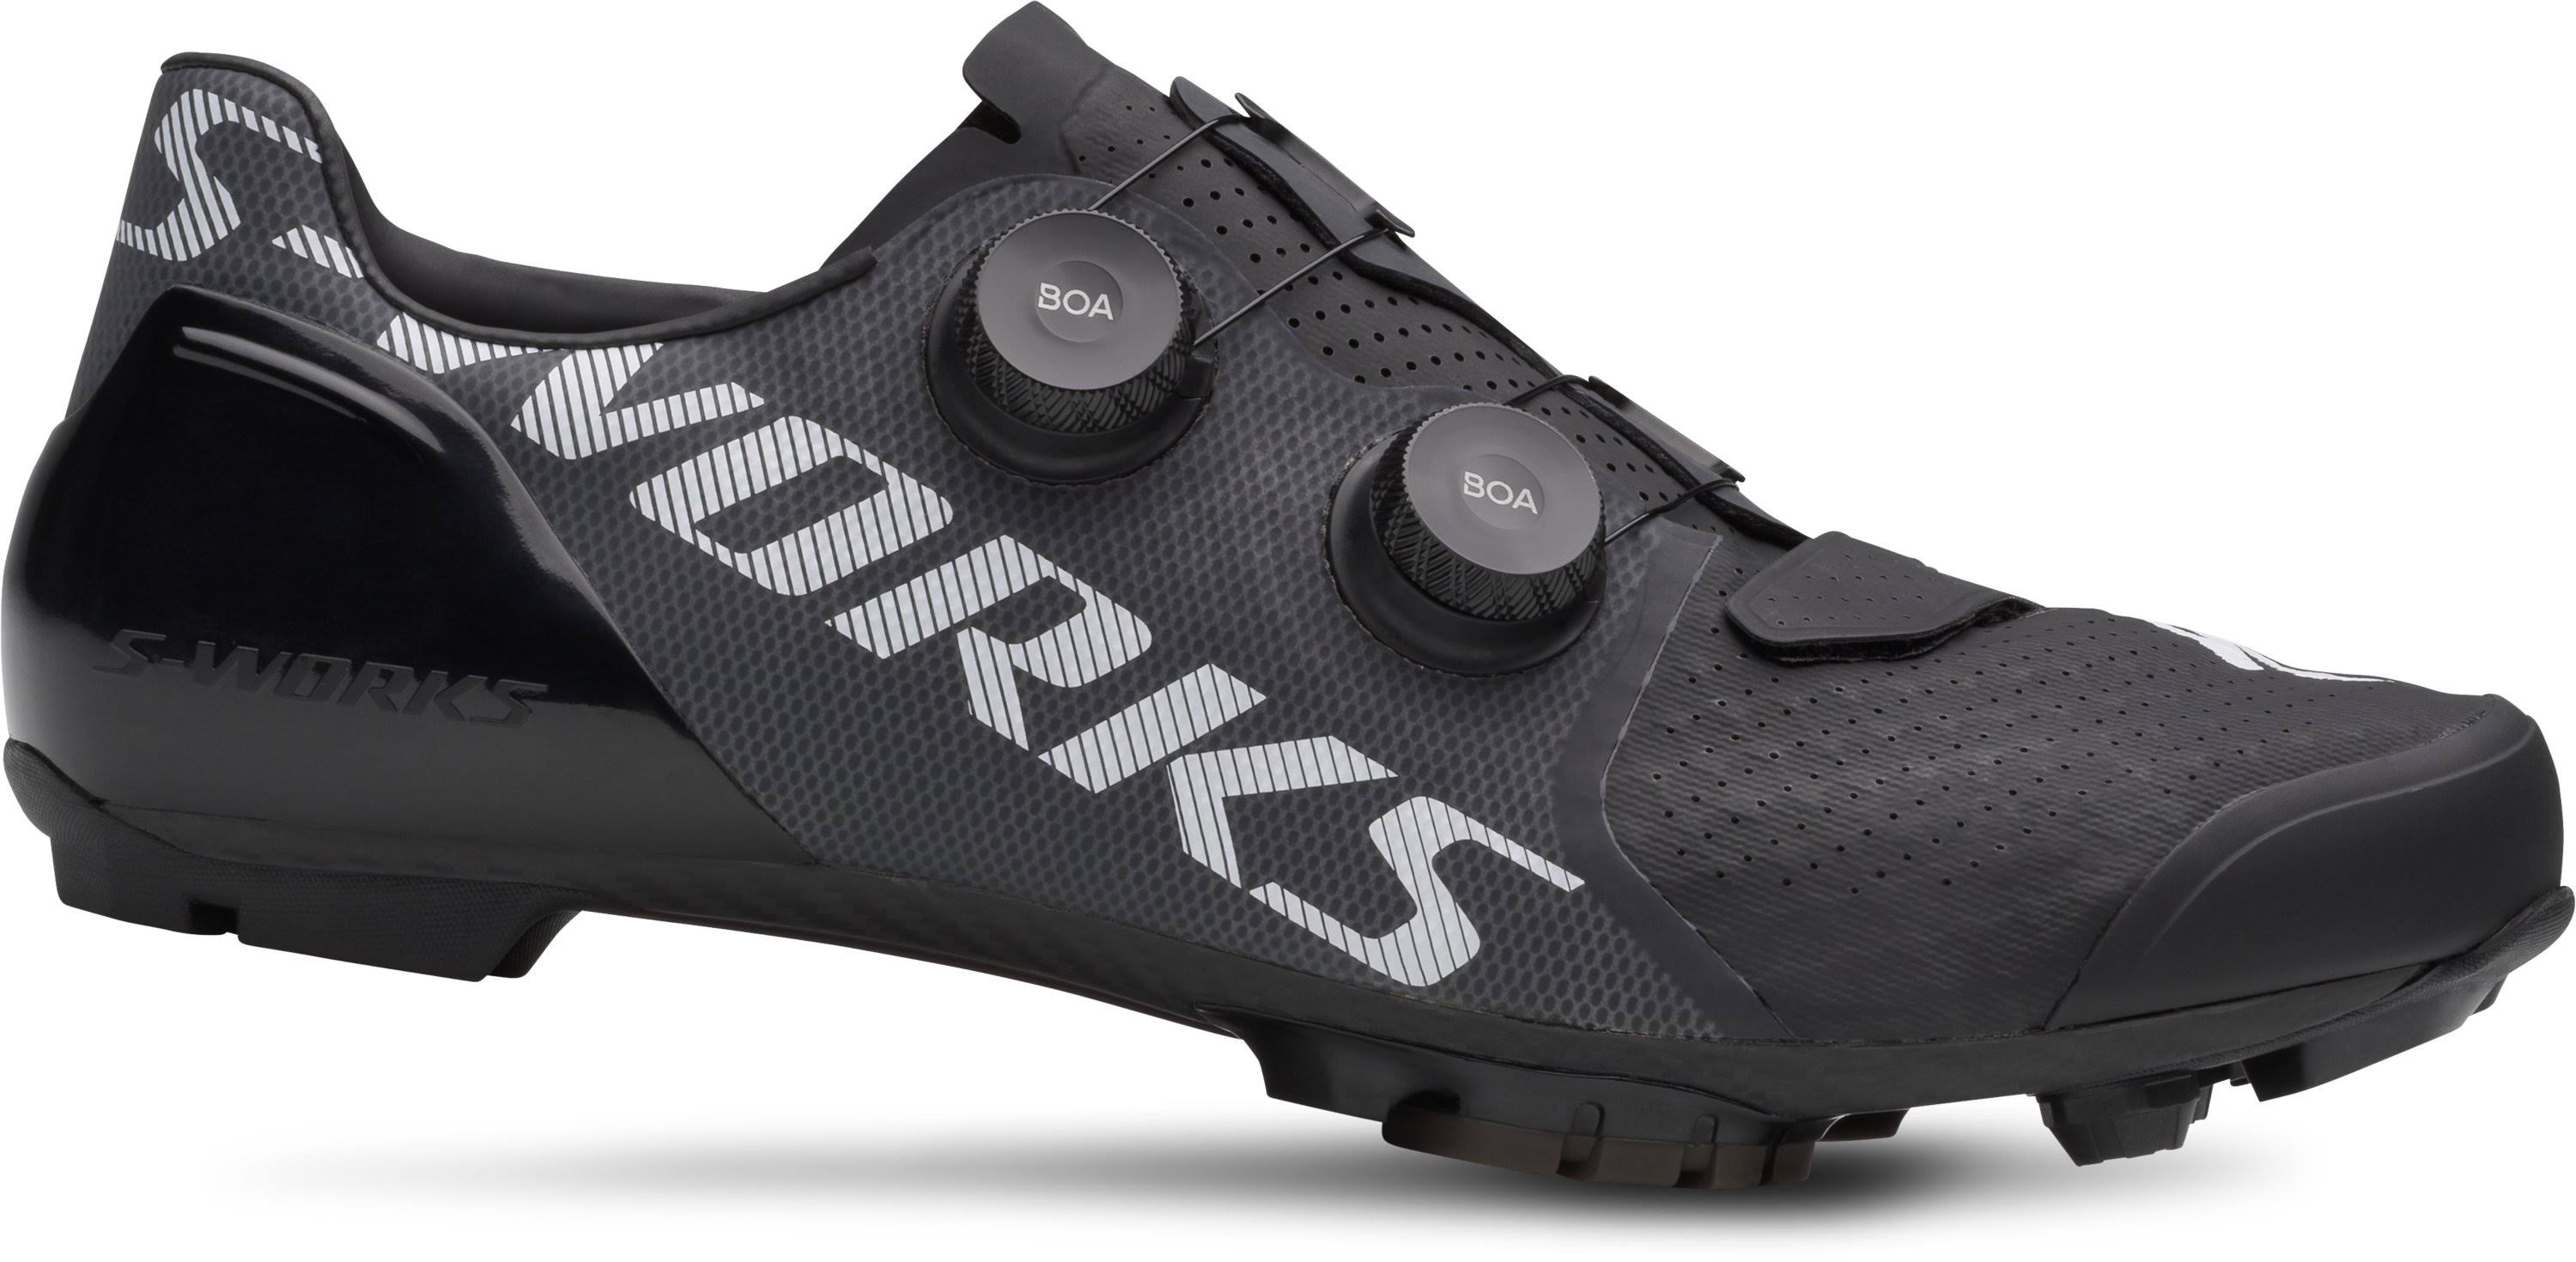 Specialized S-Works Recon Mountain Bike Shoes - Black - 46.5